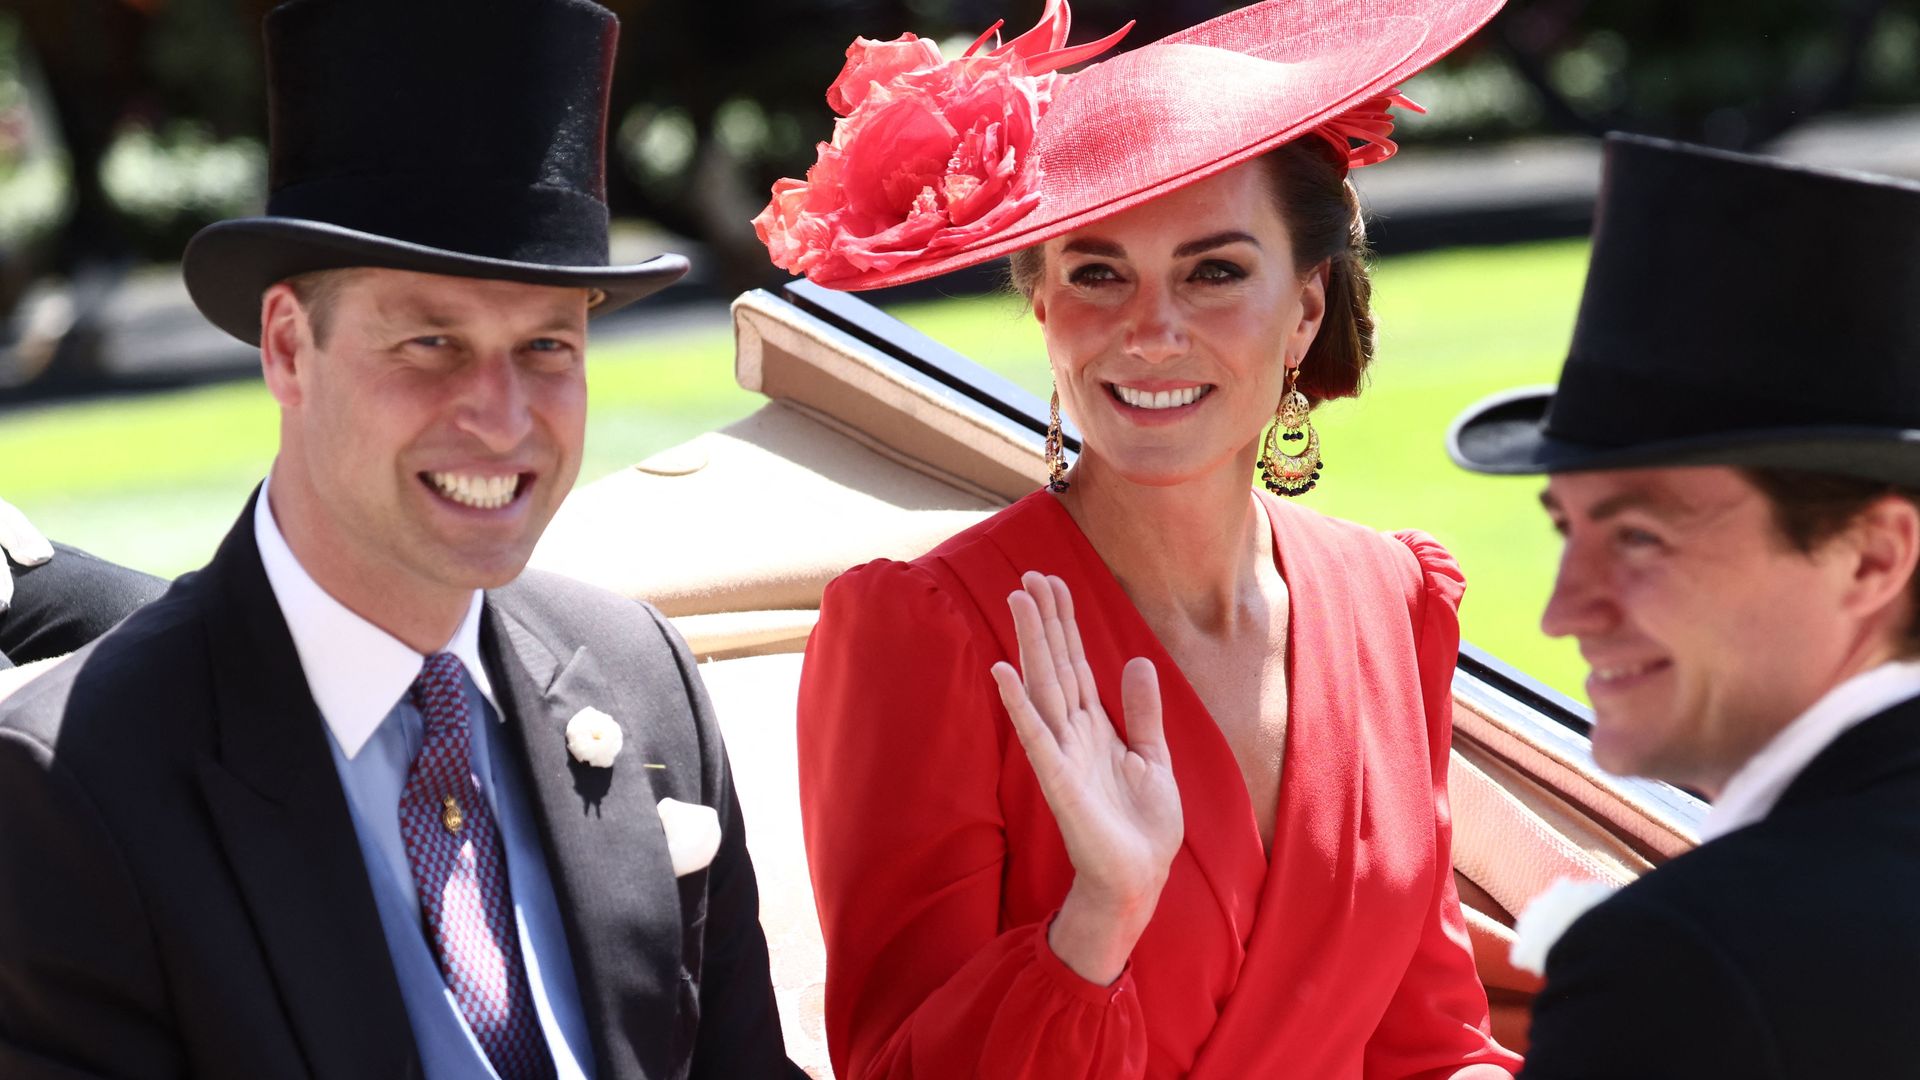 Britain's Prince and Princess of Wales smile as they arrive in a horse-drawn carriage